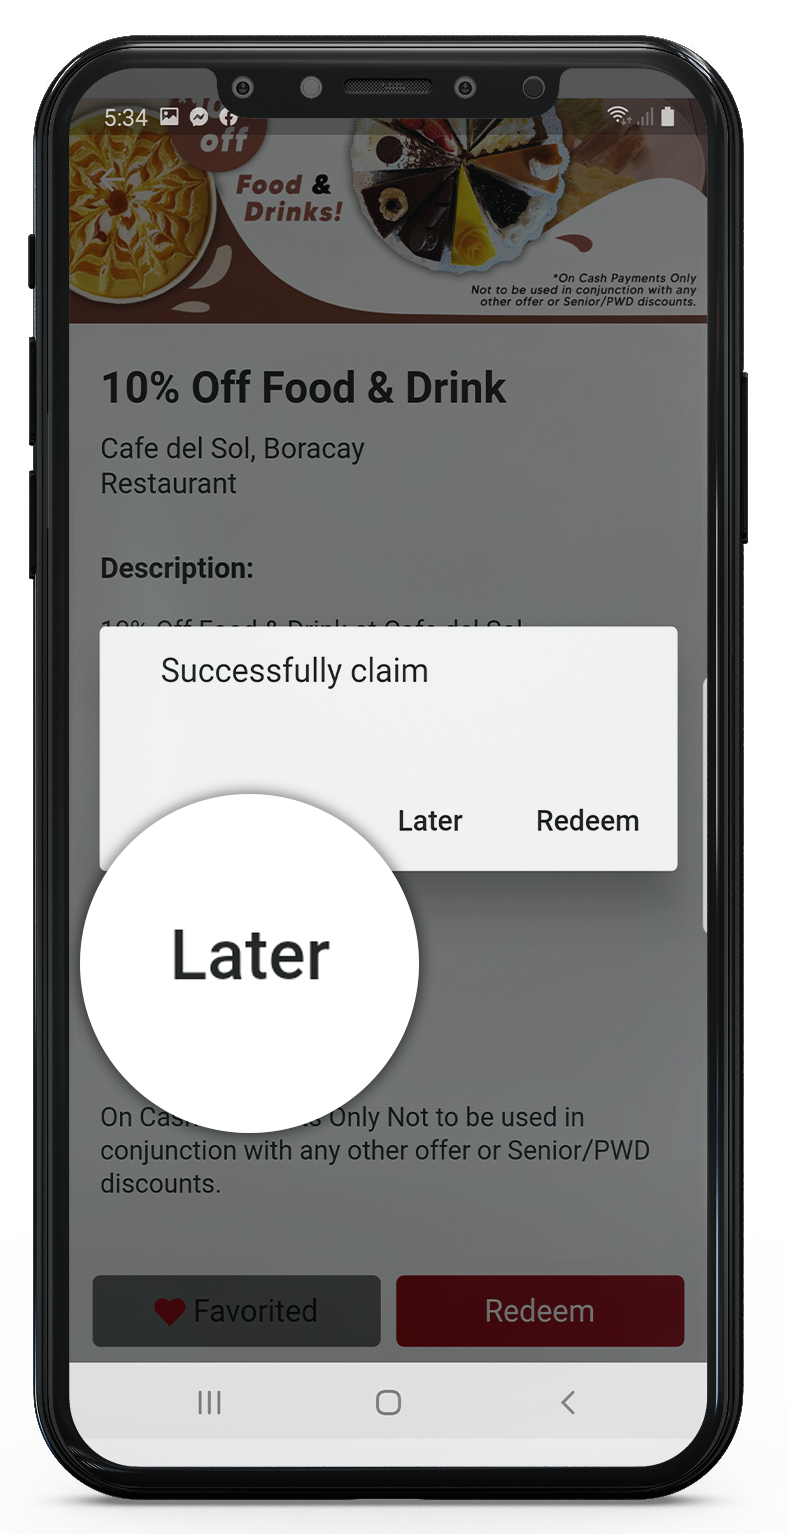 Screenshot showing the Choice to claim or redeem a Loyalty Deal on the RANGGO App